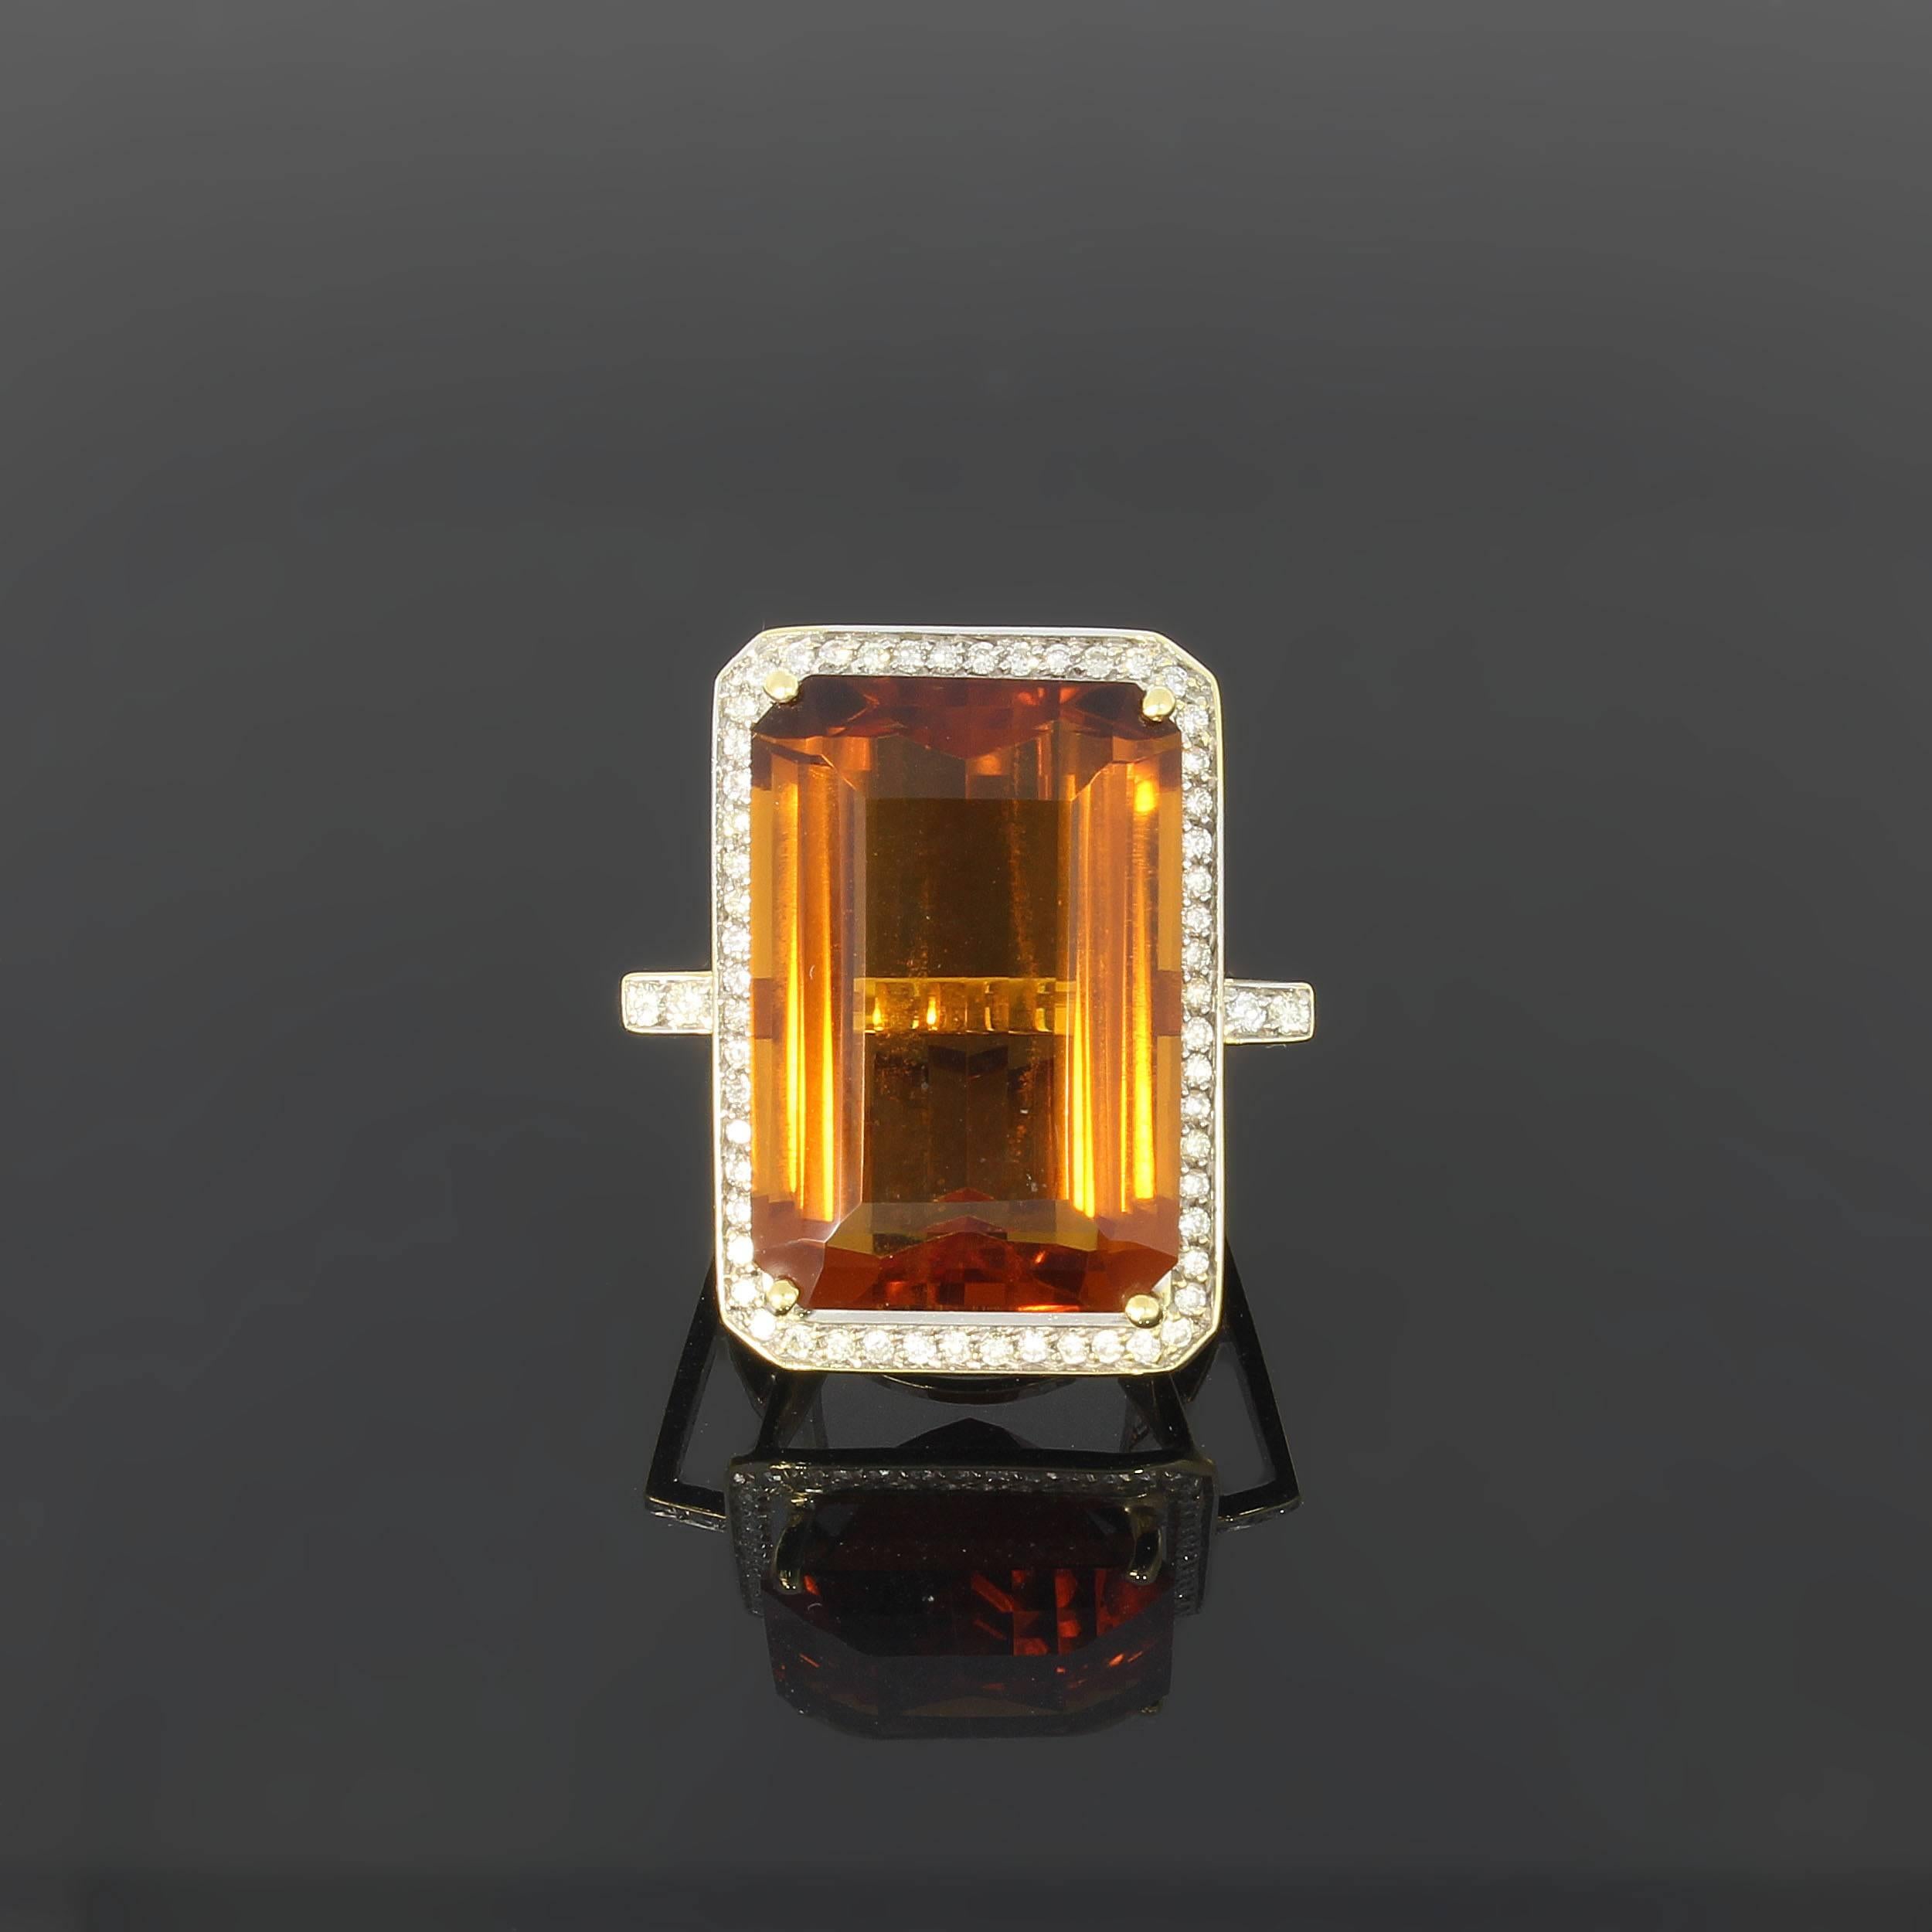 Large citrine weighing 13,4 ct., flanked by 60 brilliant-cut diamonds weighing ca. 1,0 ct. Mounted in 18 K yellow gold.  Hallmarked with 18K and maker mark. Total weight: 13,31 grams. Ring size: 52 ( US 6 ). Resizable.
Measurements: 1.14 x 0.75 in (